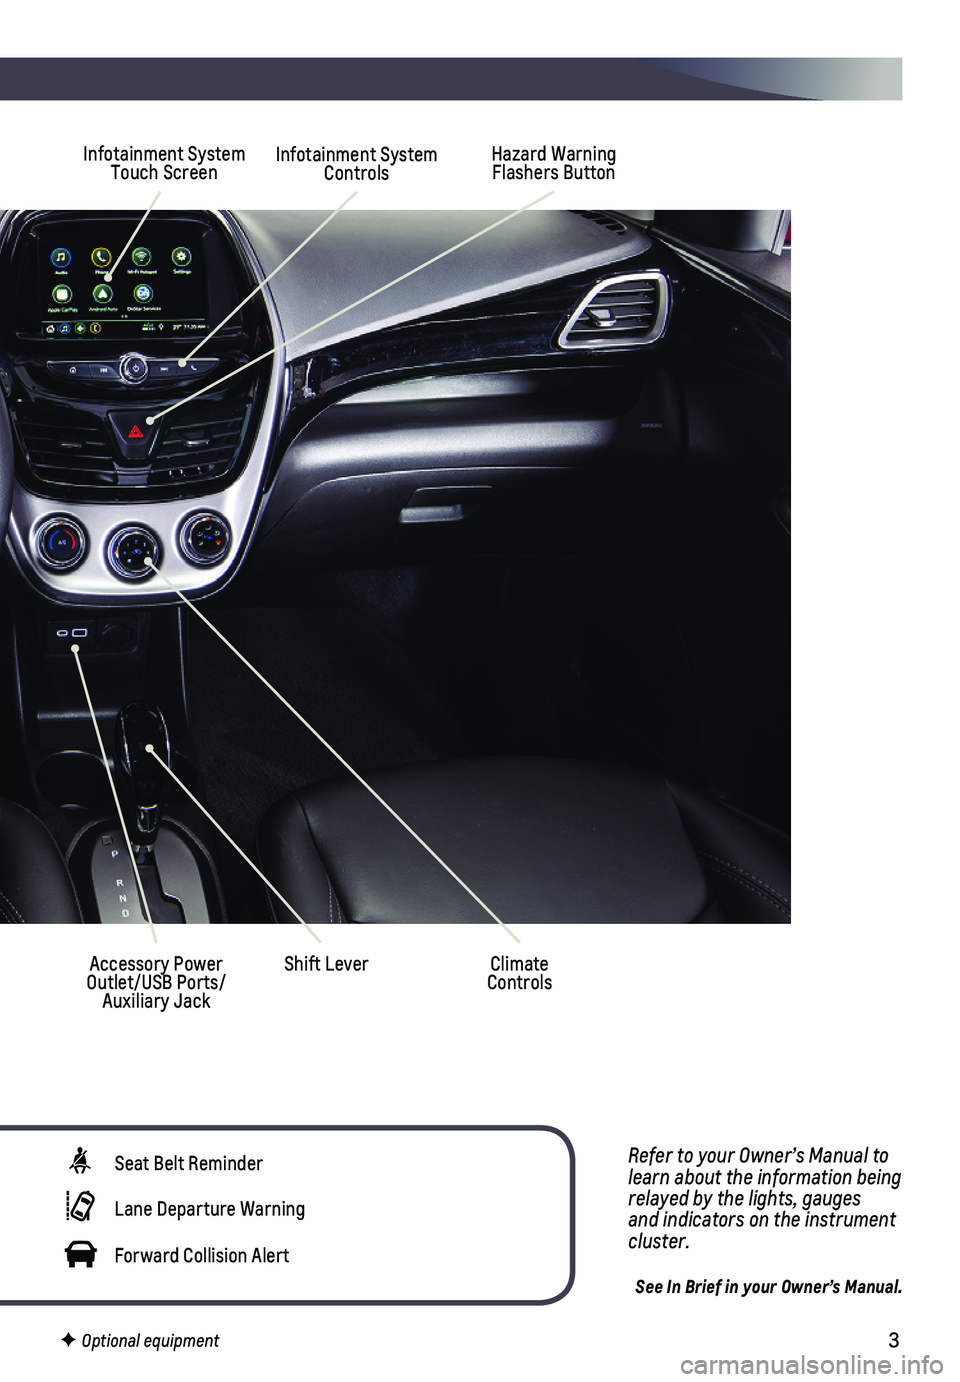 CHEVROLET SPARK 2019  Get To Know Guide 3
Refer to your Owner’s Manual to learn about the information being relayed by the lights, gauges and indicators on the instrument cluster.
See In Brief in your Owner’s Manual.
Hazard Warning Flas